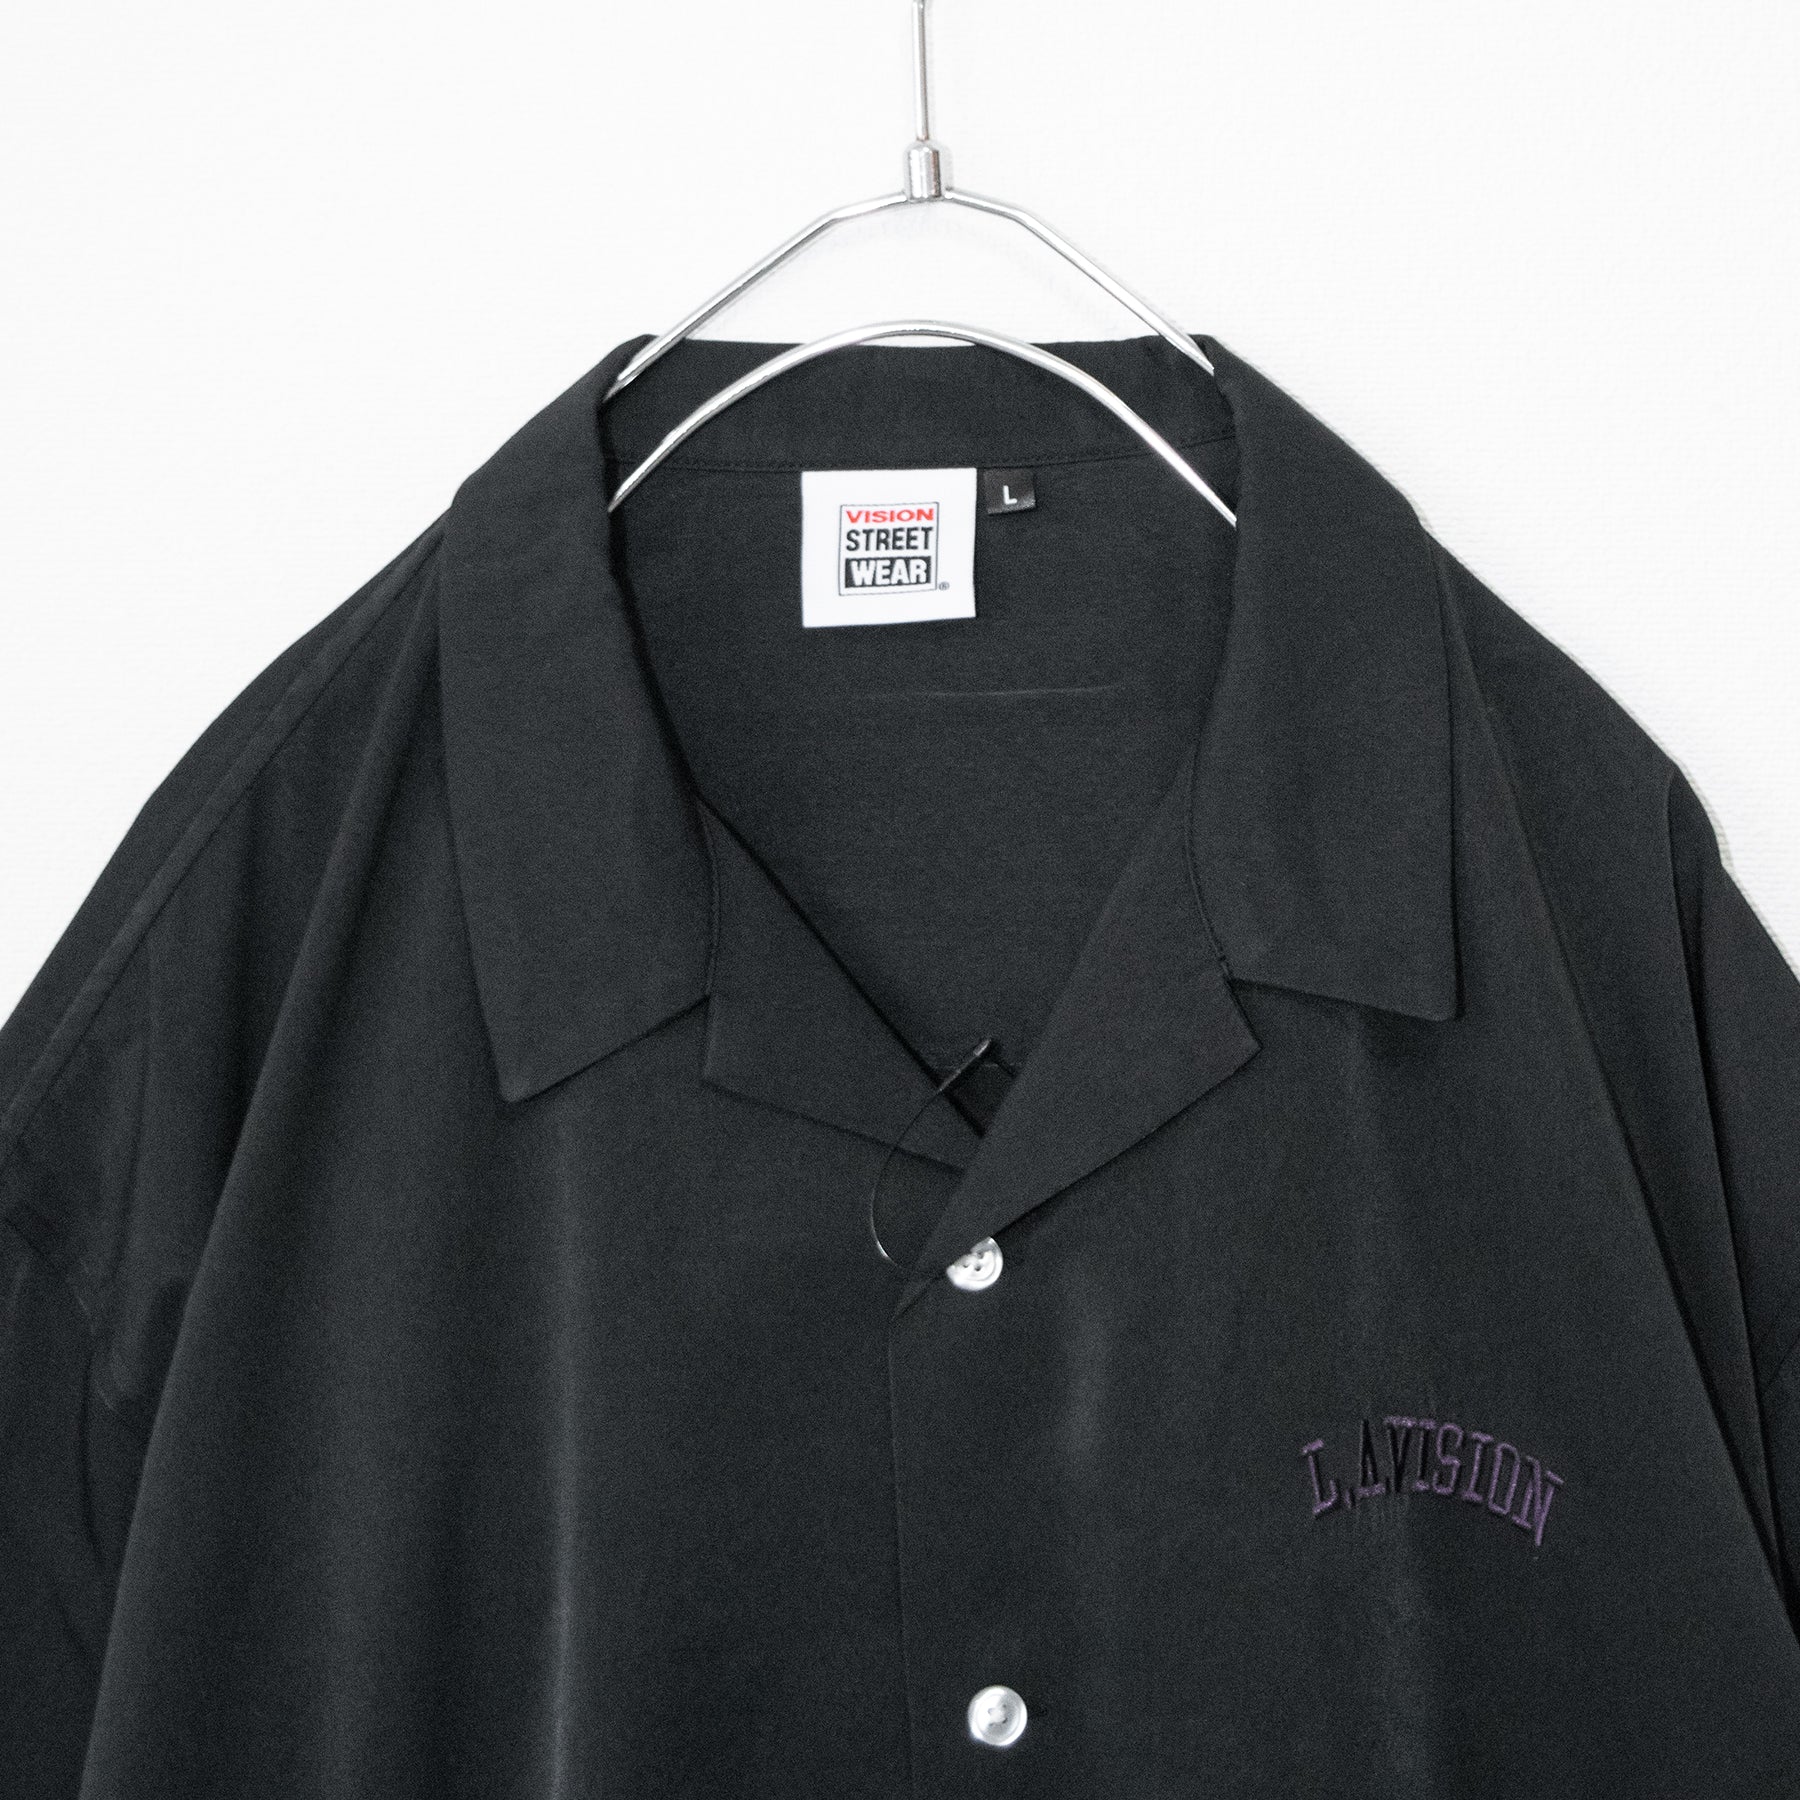 VISION STREET WEAR Satin Patch Open Collar S/S Shirt Black - YOUAREMYPOISON